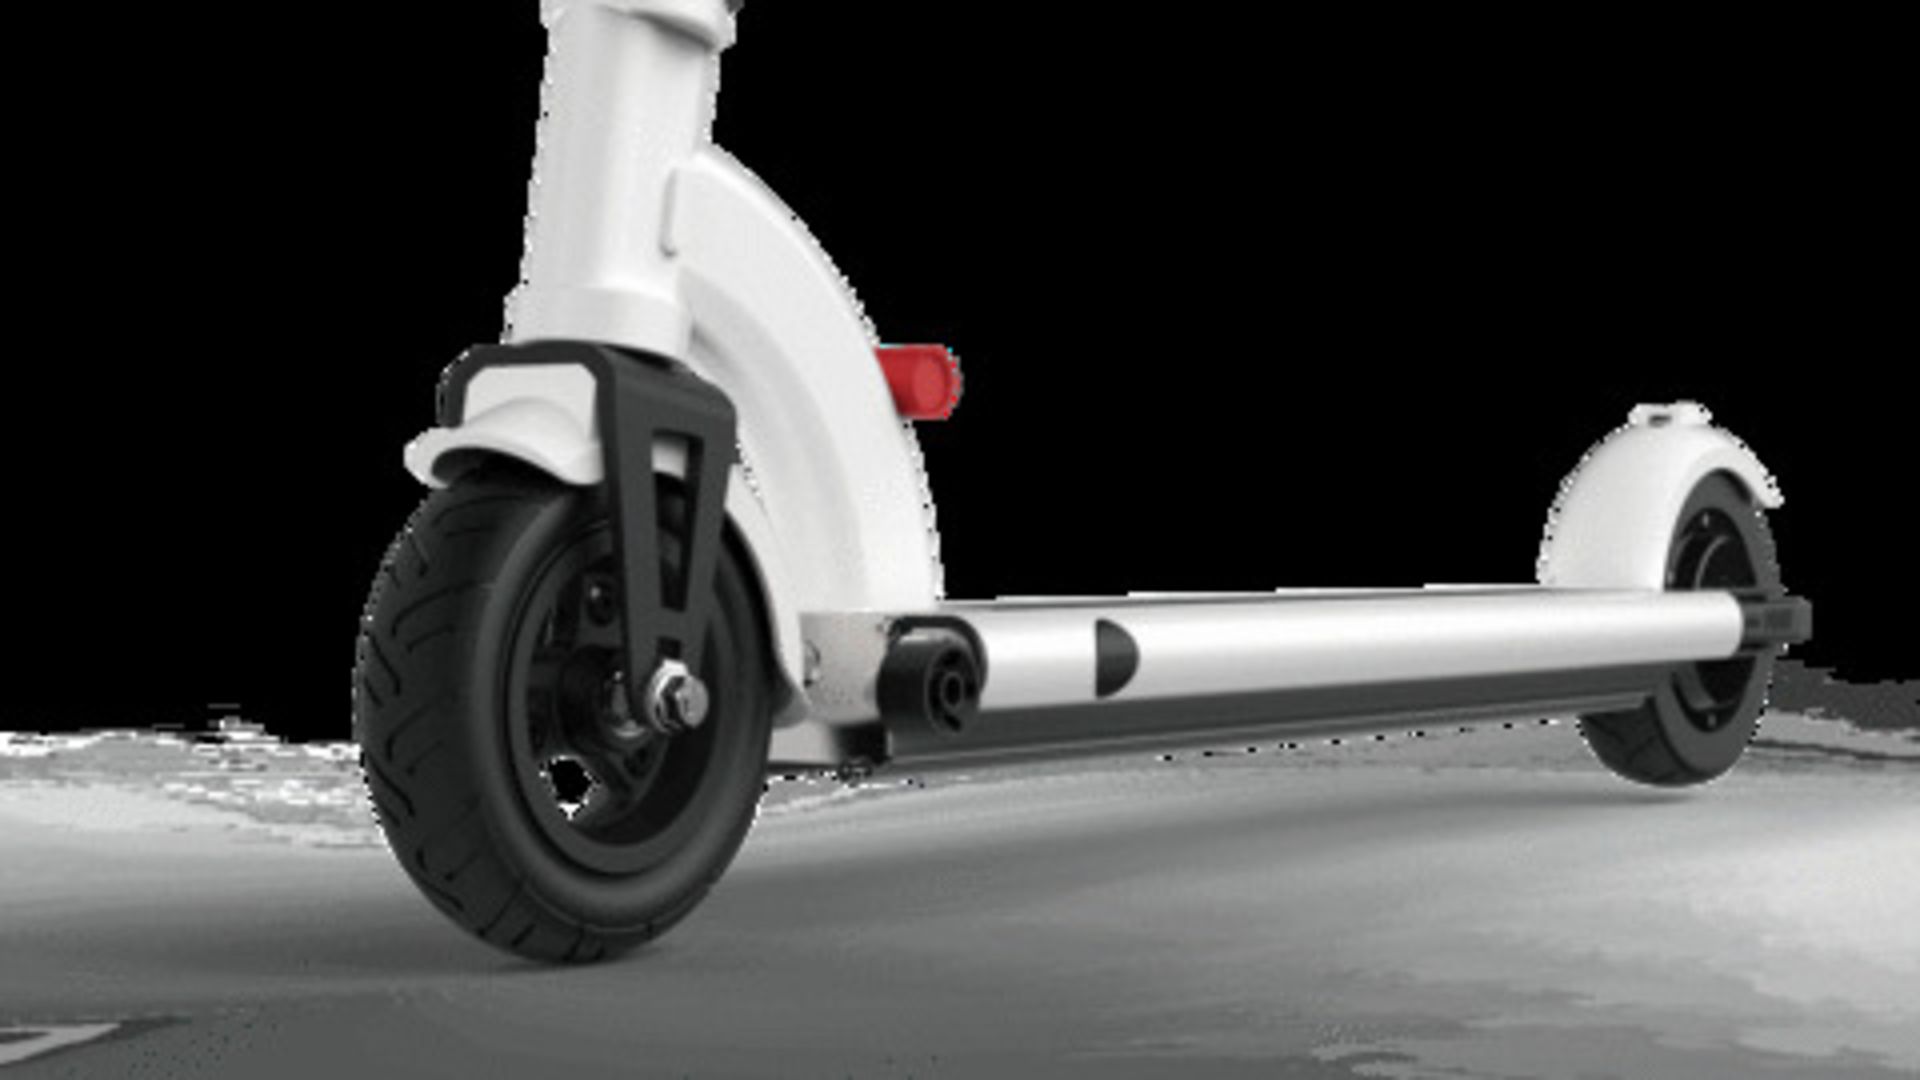 BRAND NEW NOKIM MINI FORCE WHITE 1'SELECTRIC SCOOTER (WHITE) RRP £559 - Image 3 of 4